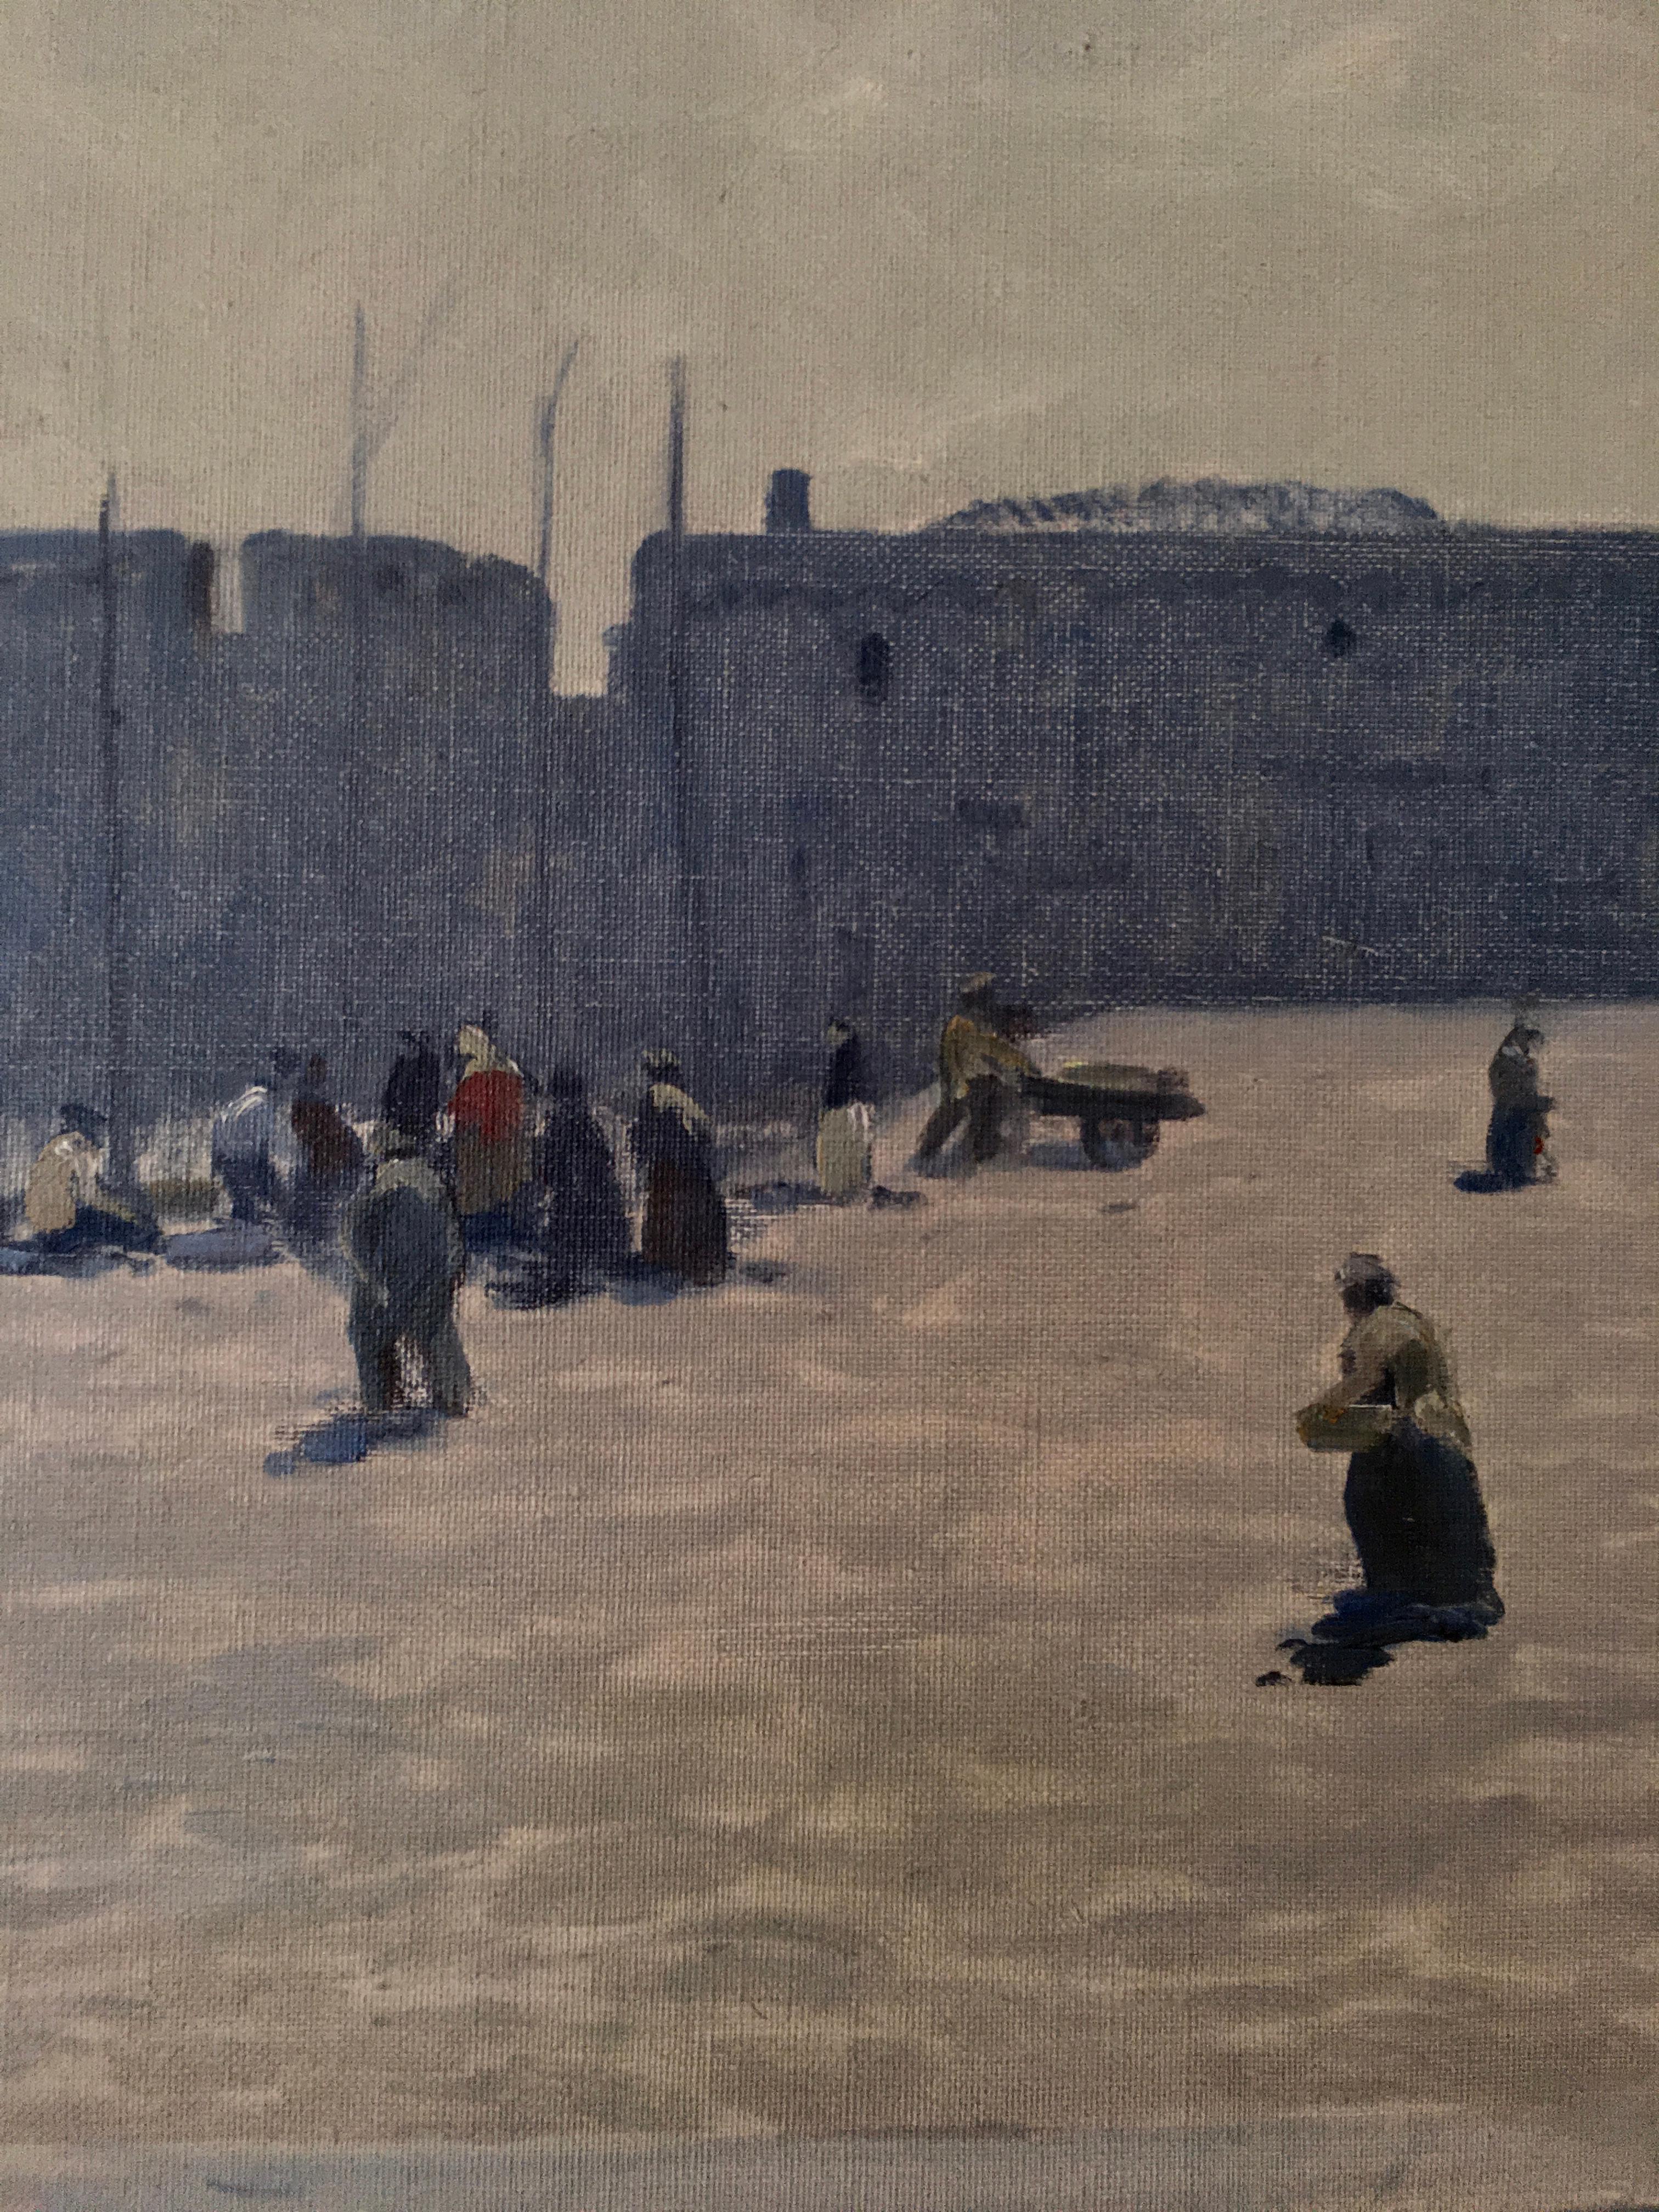 Willem Witjens painted this view on Concarneau in France. Nowadays the third most important fishing port of France. The main draw of Concarneau is the quaint (walled town) and its sandy beaches. 
Willem Witjens must have been inspired by this lovely